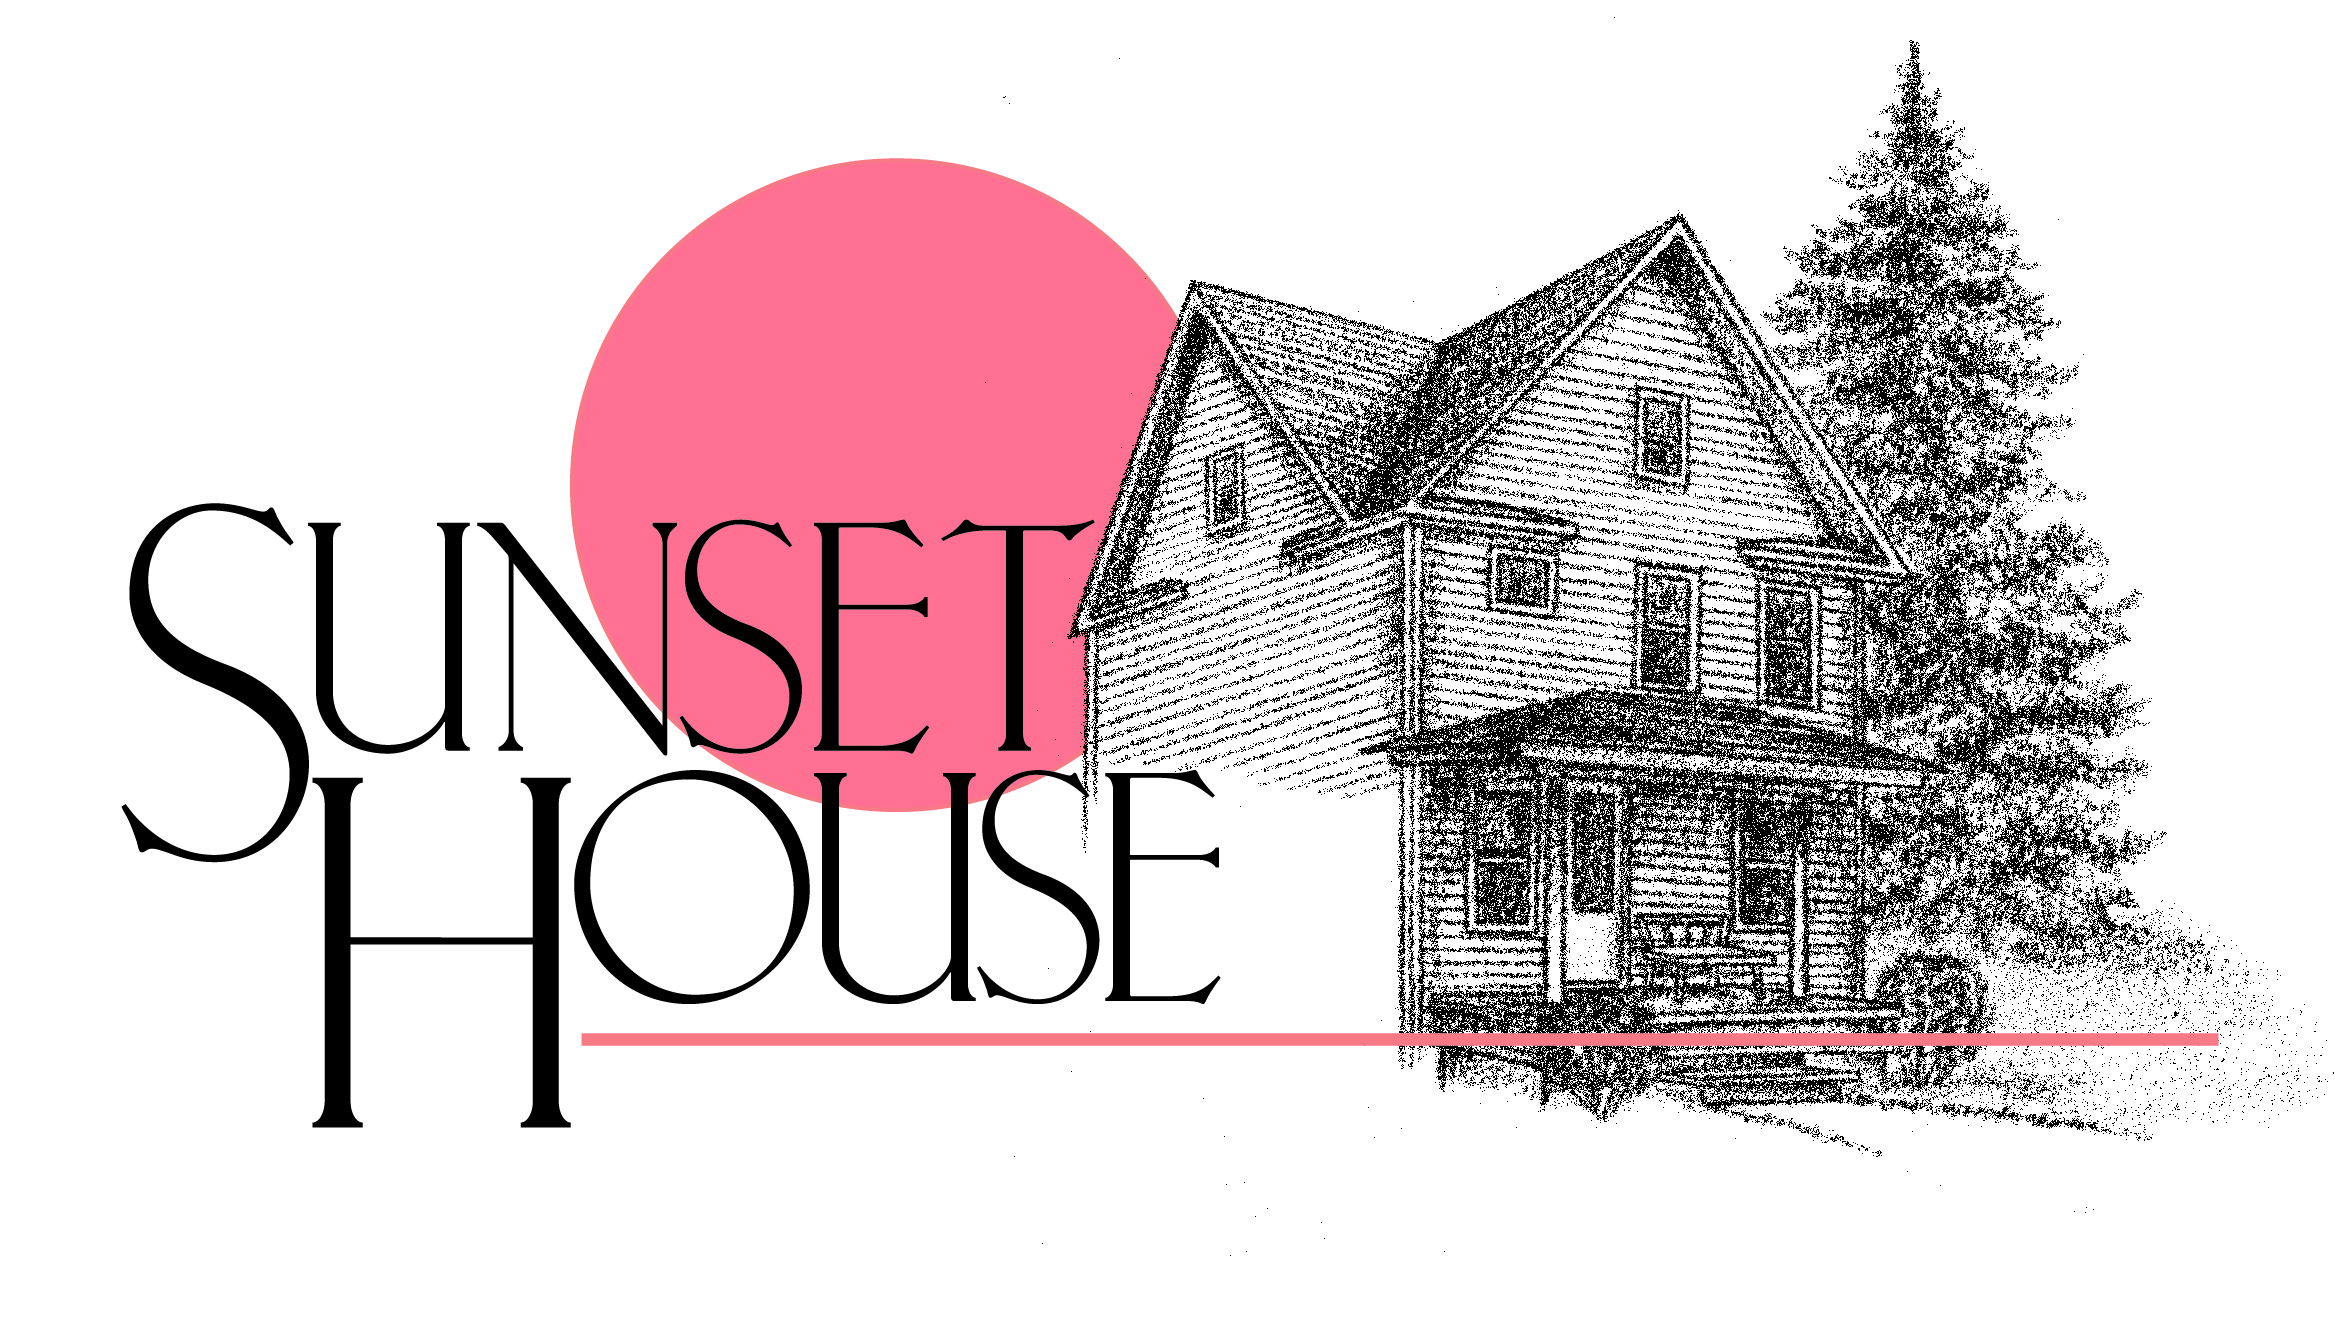 The Sunset House